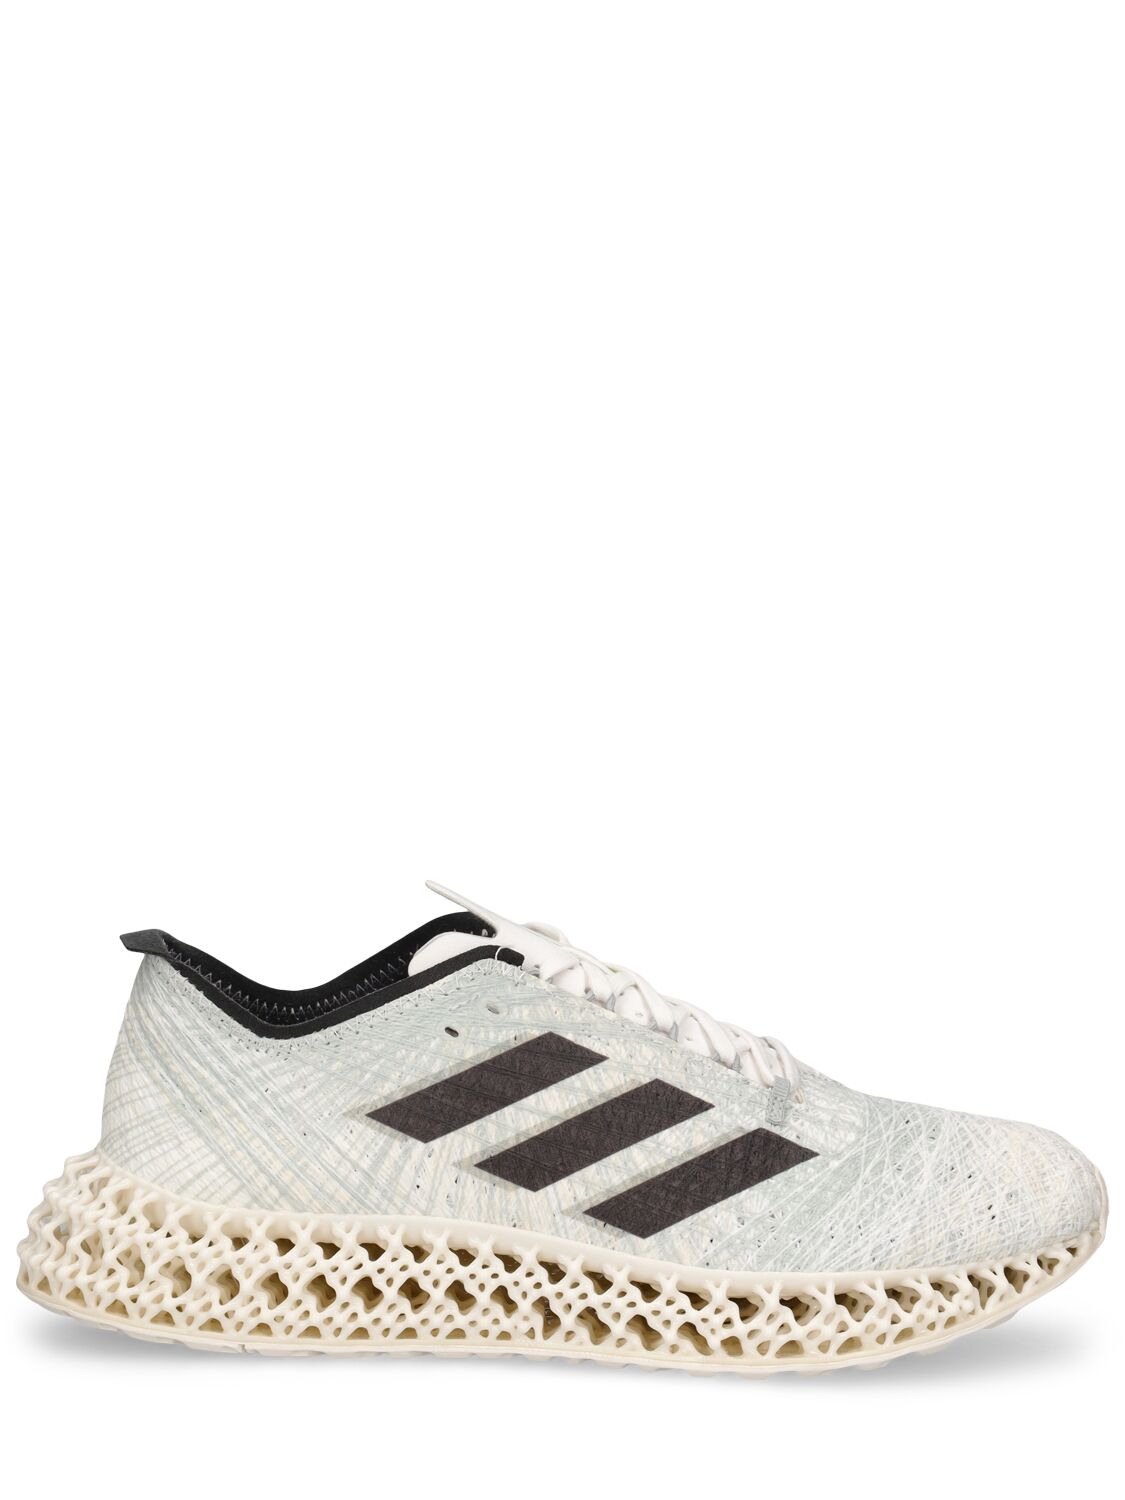 Adidas Originals 4dfwd X Strung Sneakers In White,carbon